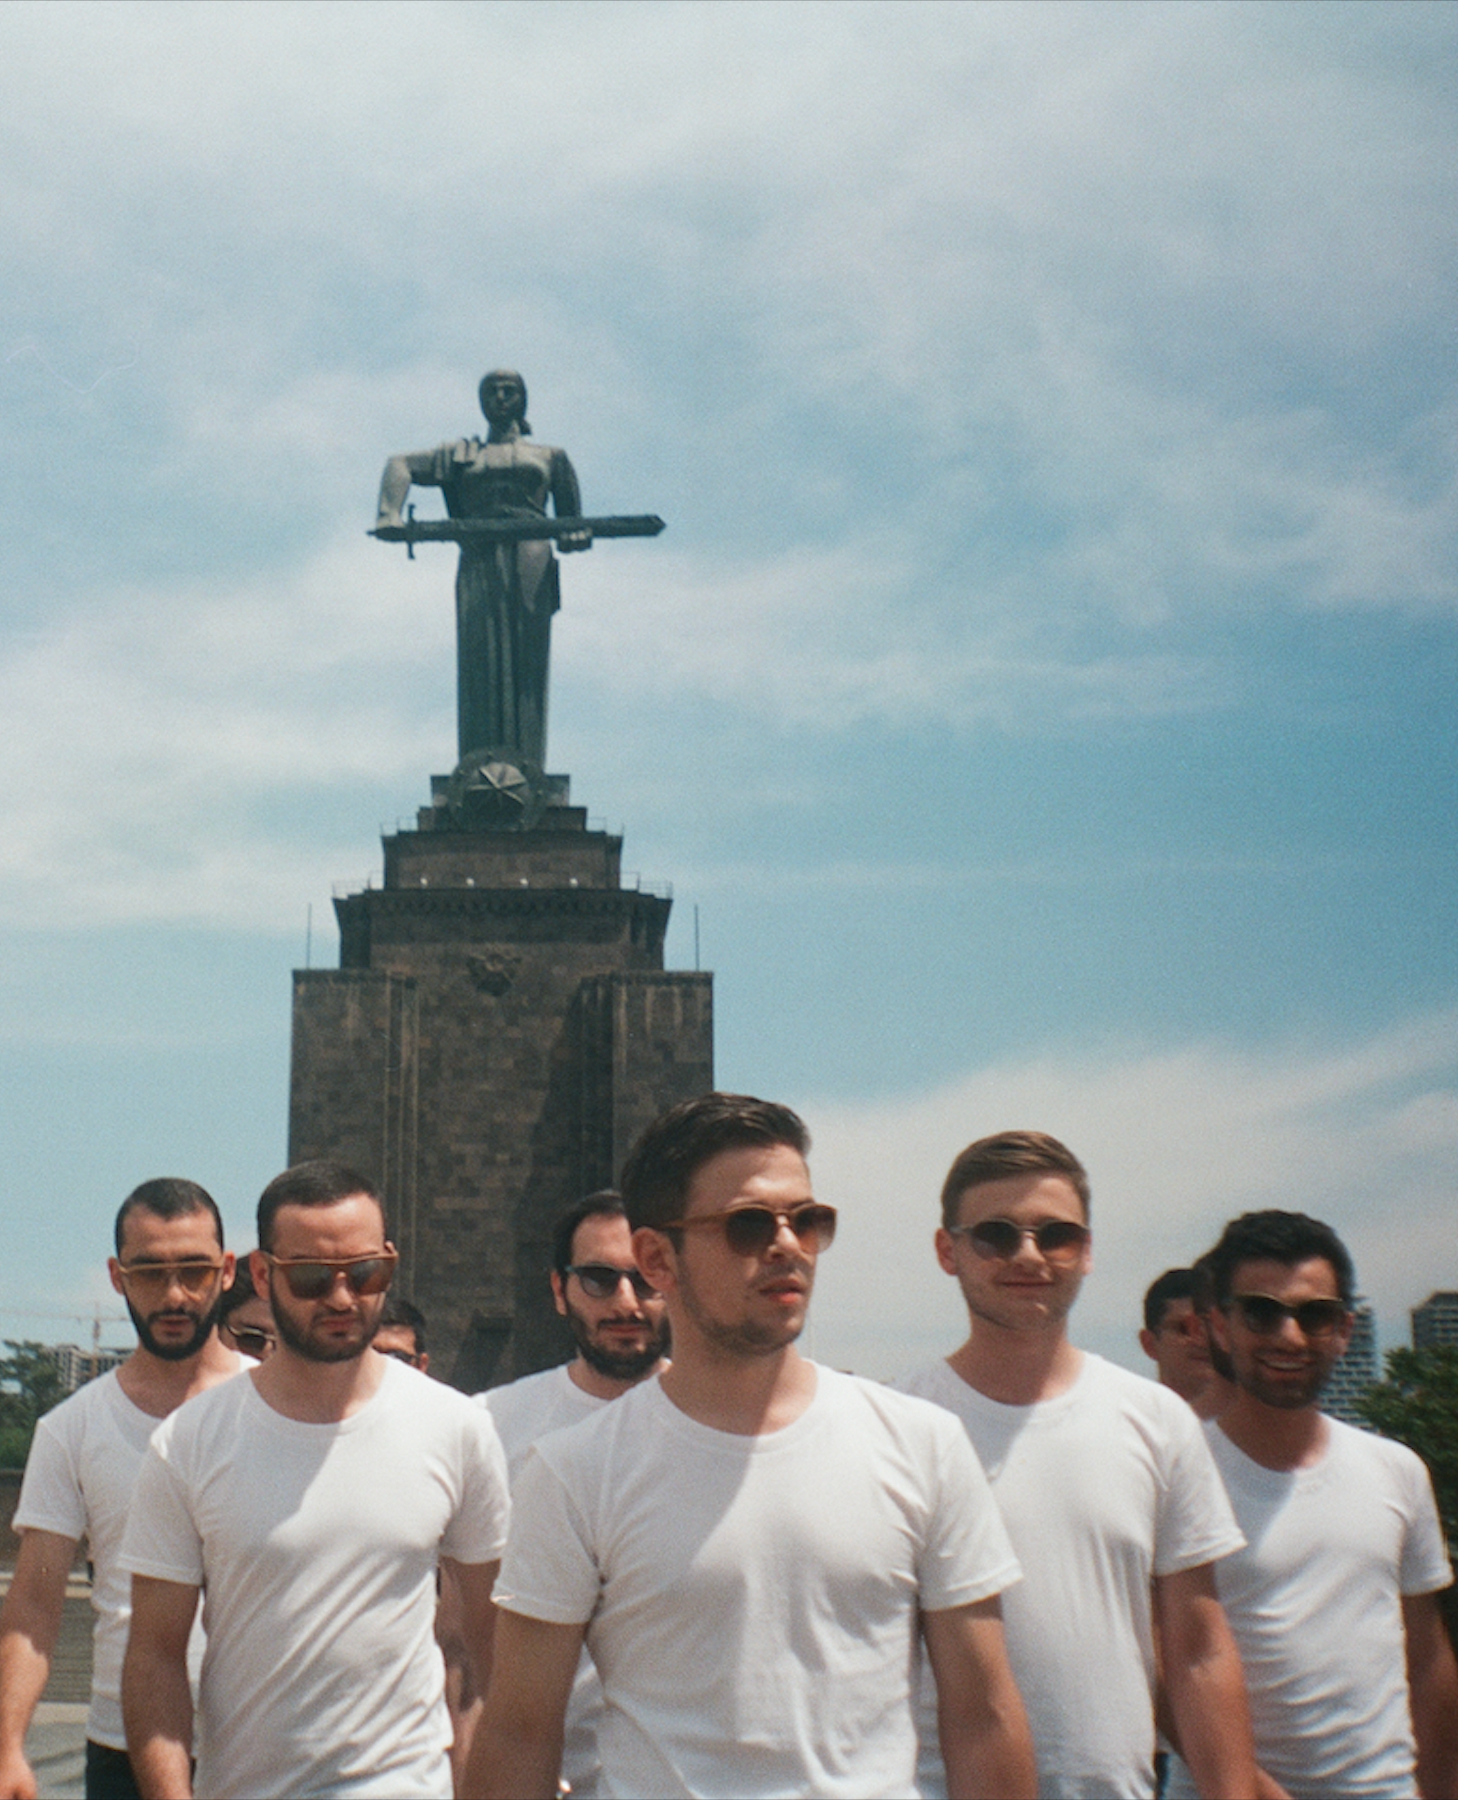 soldiers with sunglasses in front of Mother Armenia statue in Armenia